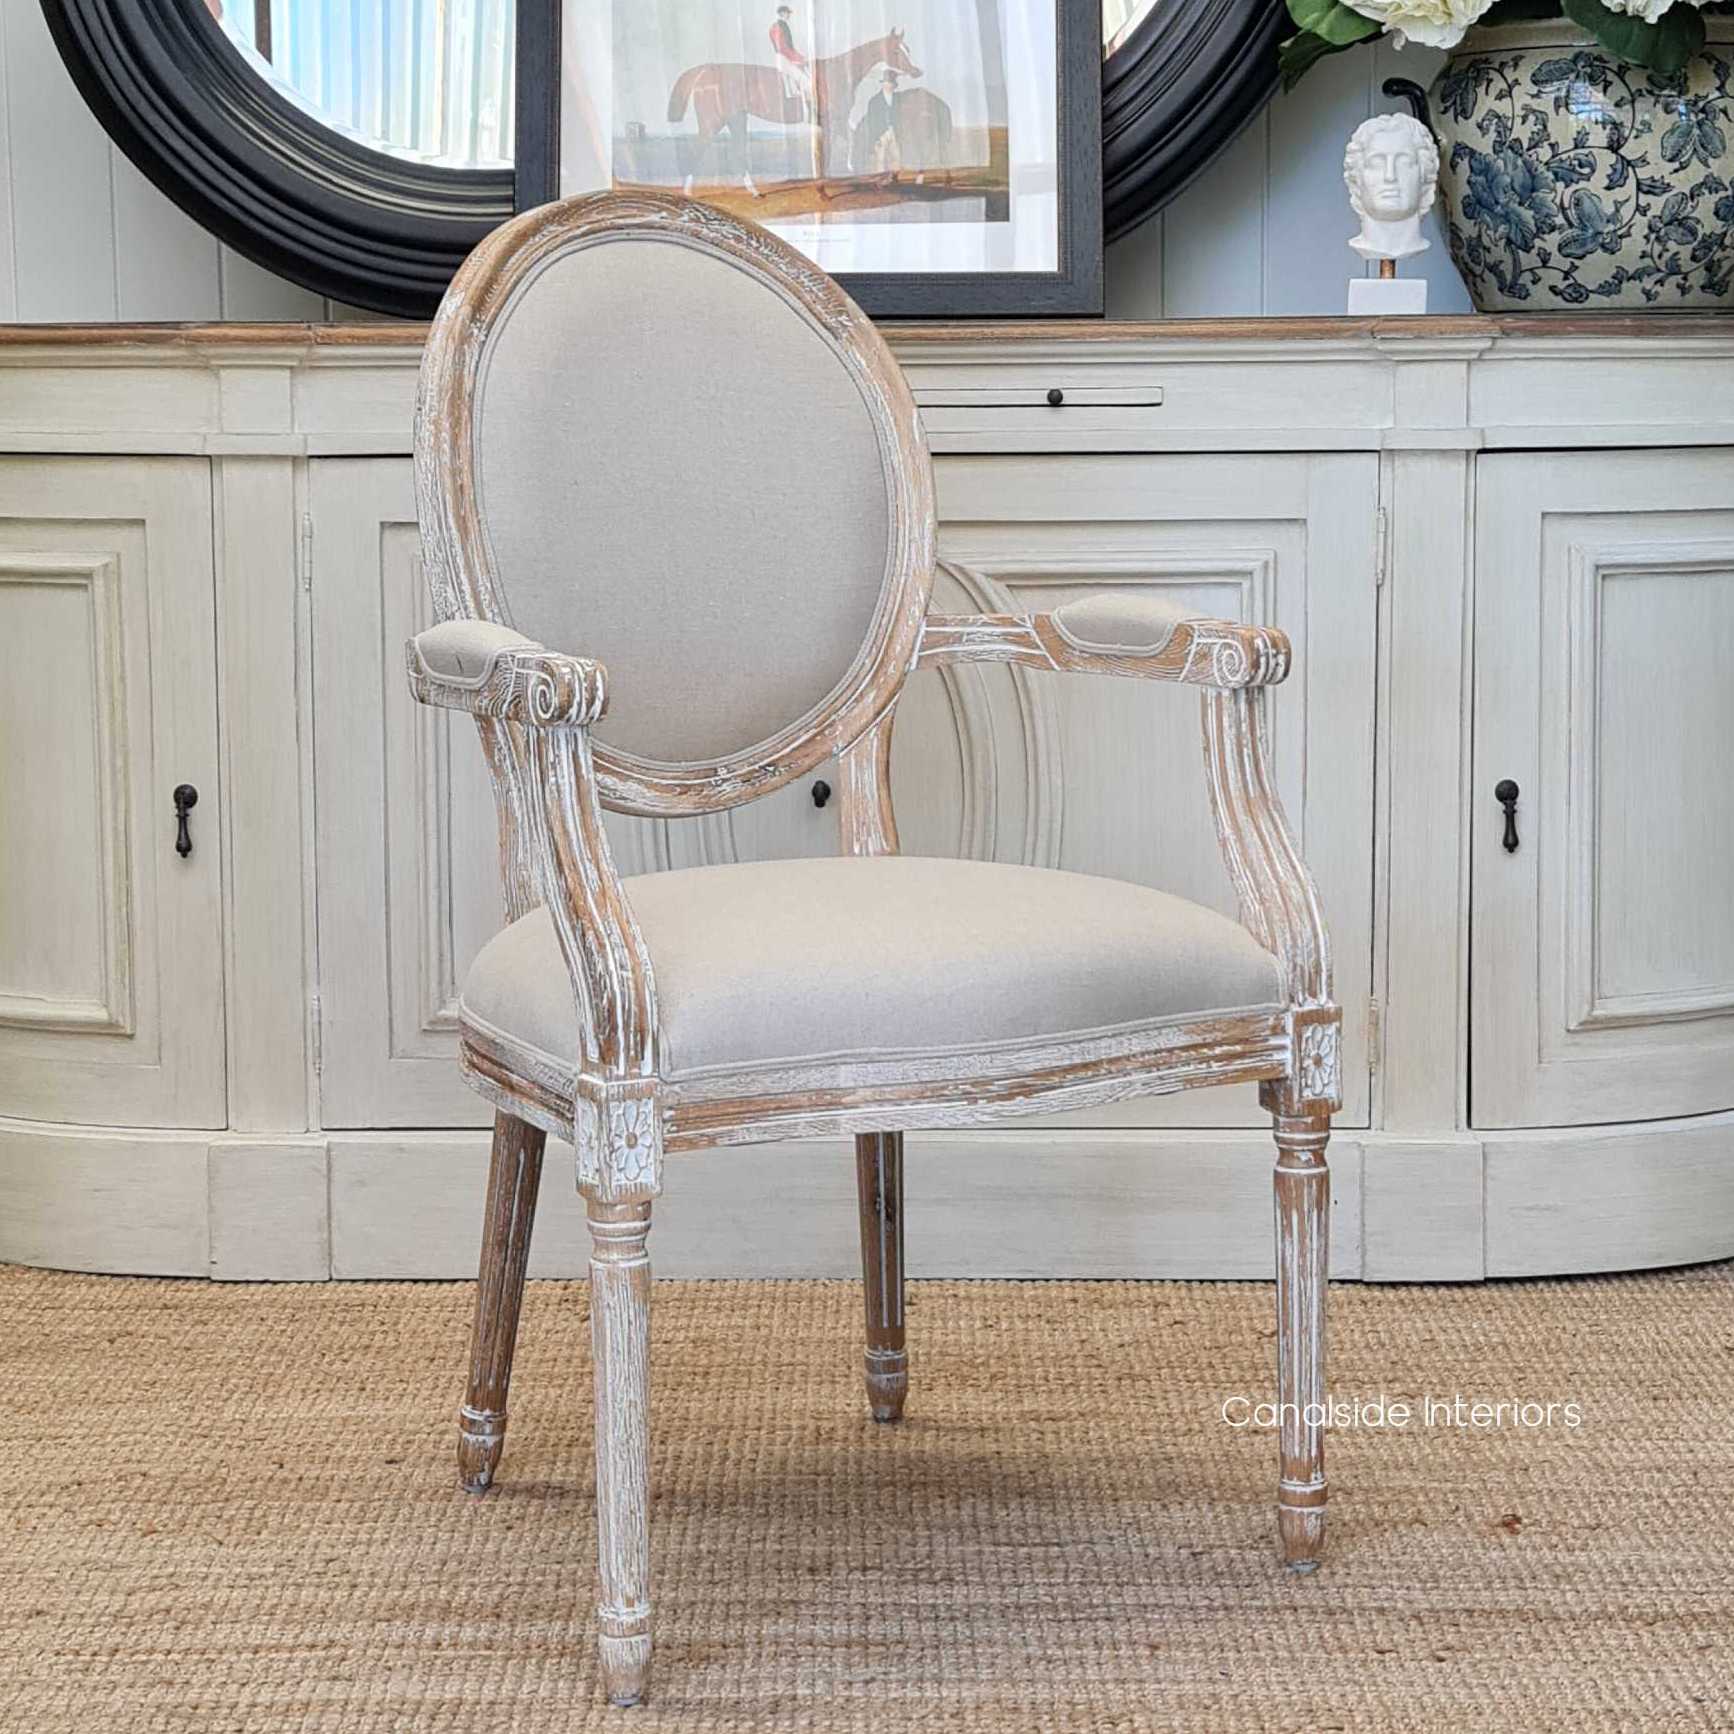 Sansa Carver Chair with arms Distressed Limewash Oak with cream linen upholstery  FRENCH  FURNITURE, CHAIRS, HAMPTONS Style, PLANTATION Style, CHAIRS Dining, dining room, kitchen, kitchen chairs, balloon back, louis